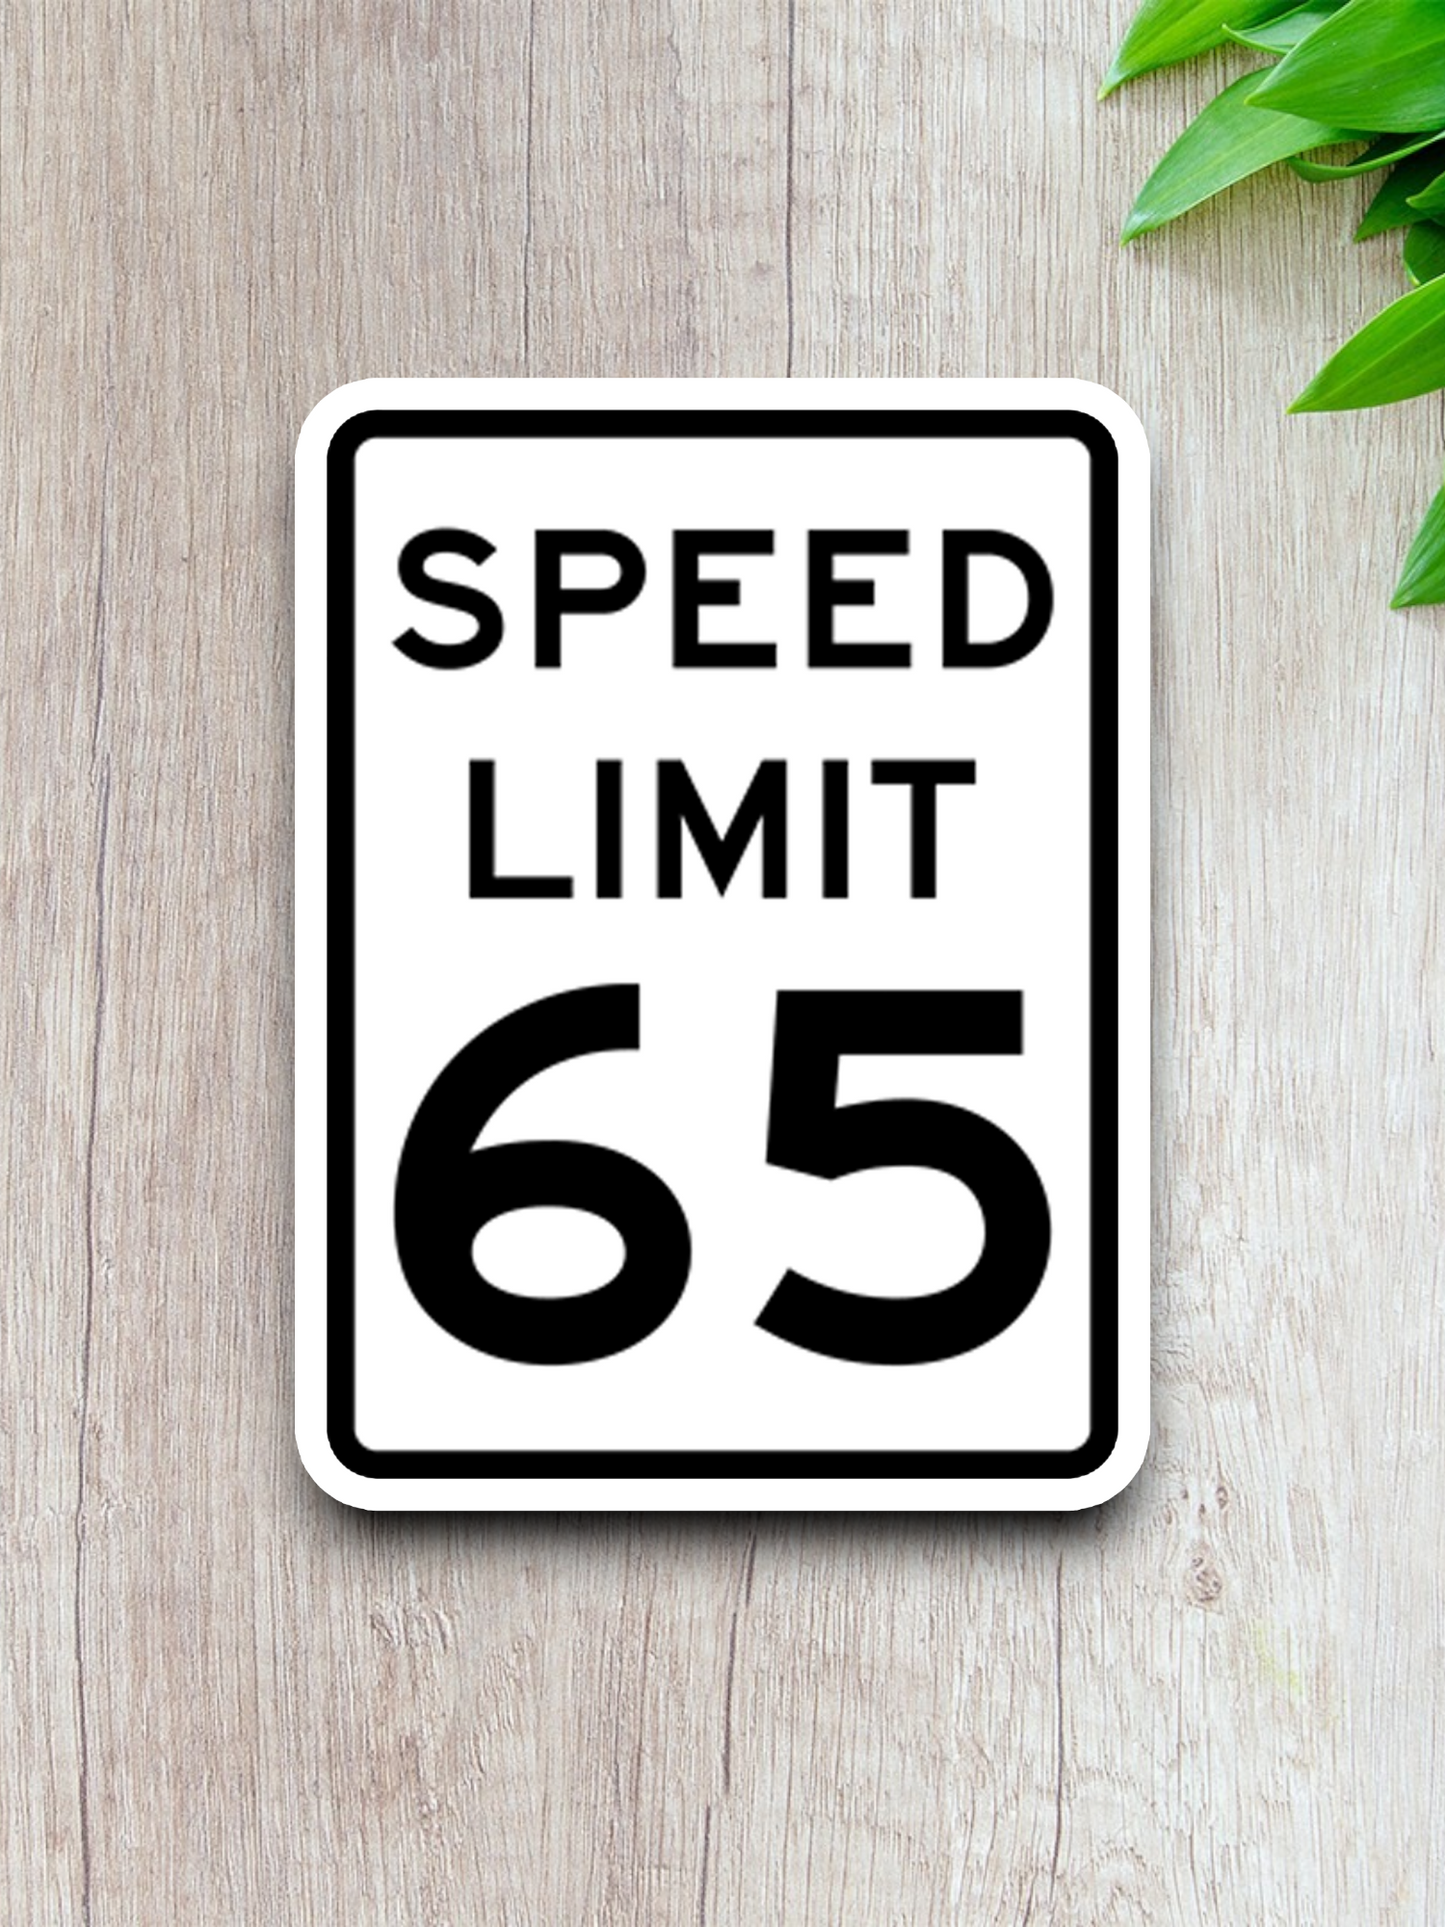 65 Miles Per Hour Speed Limit Road Sign Sticker